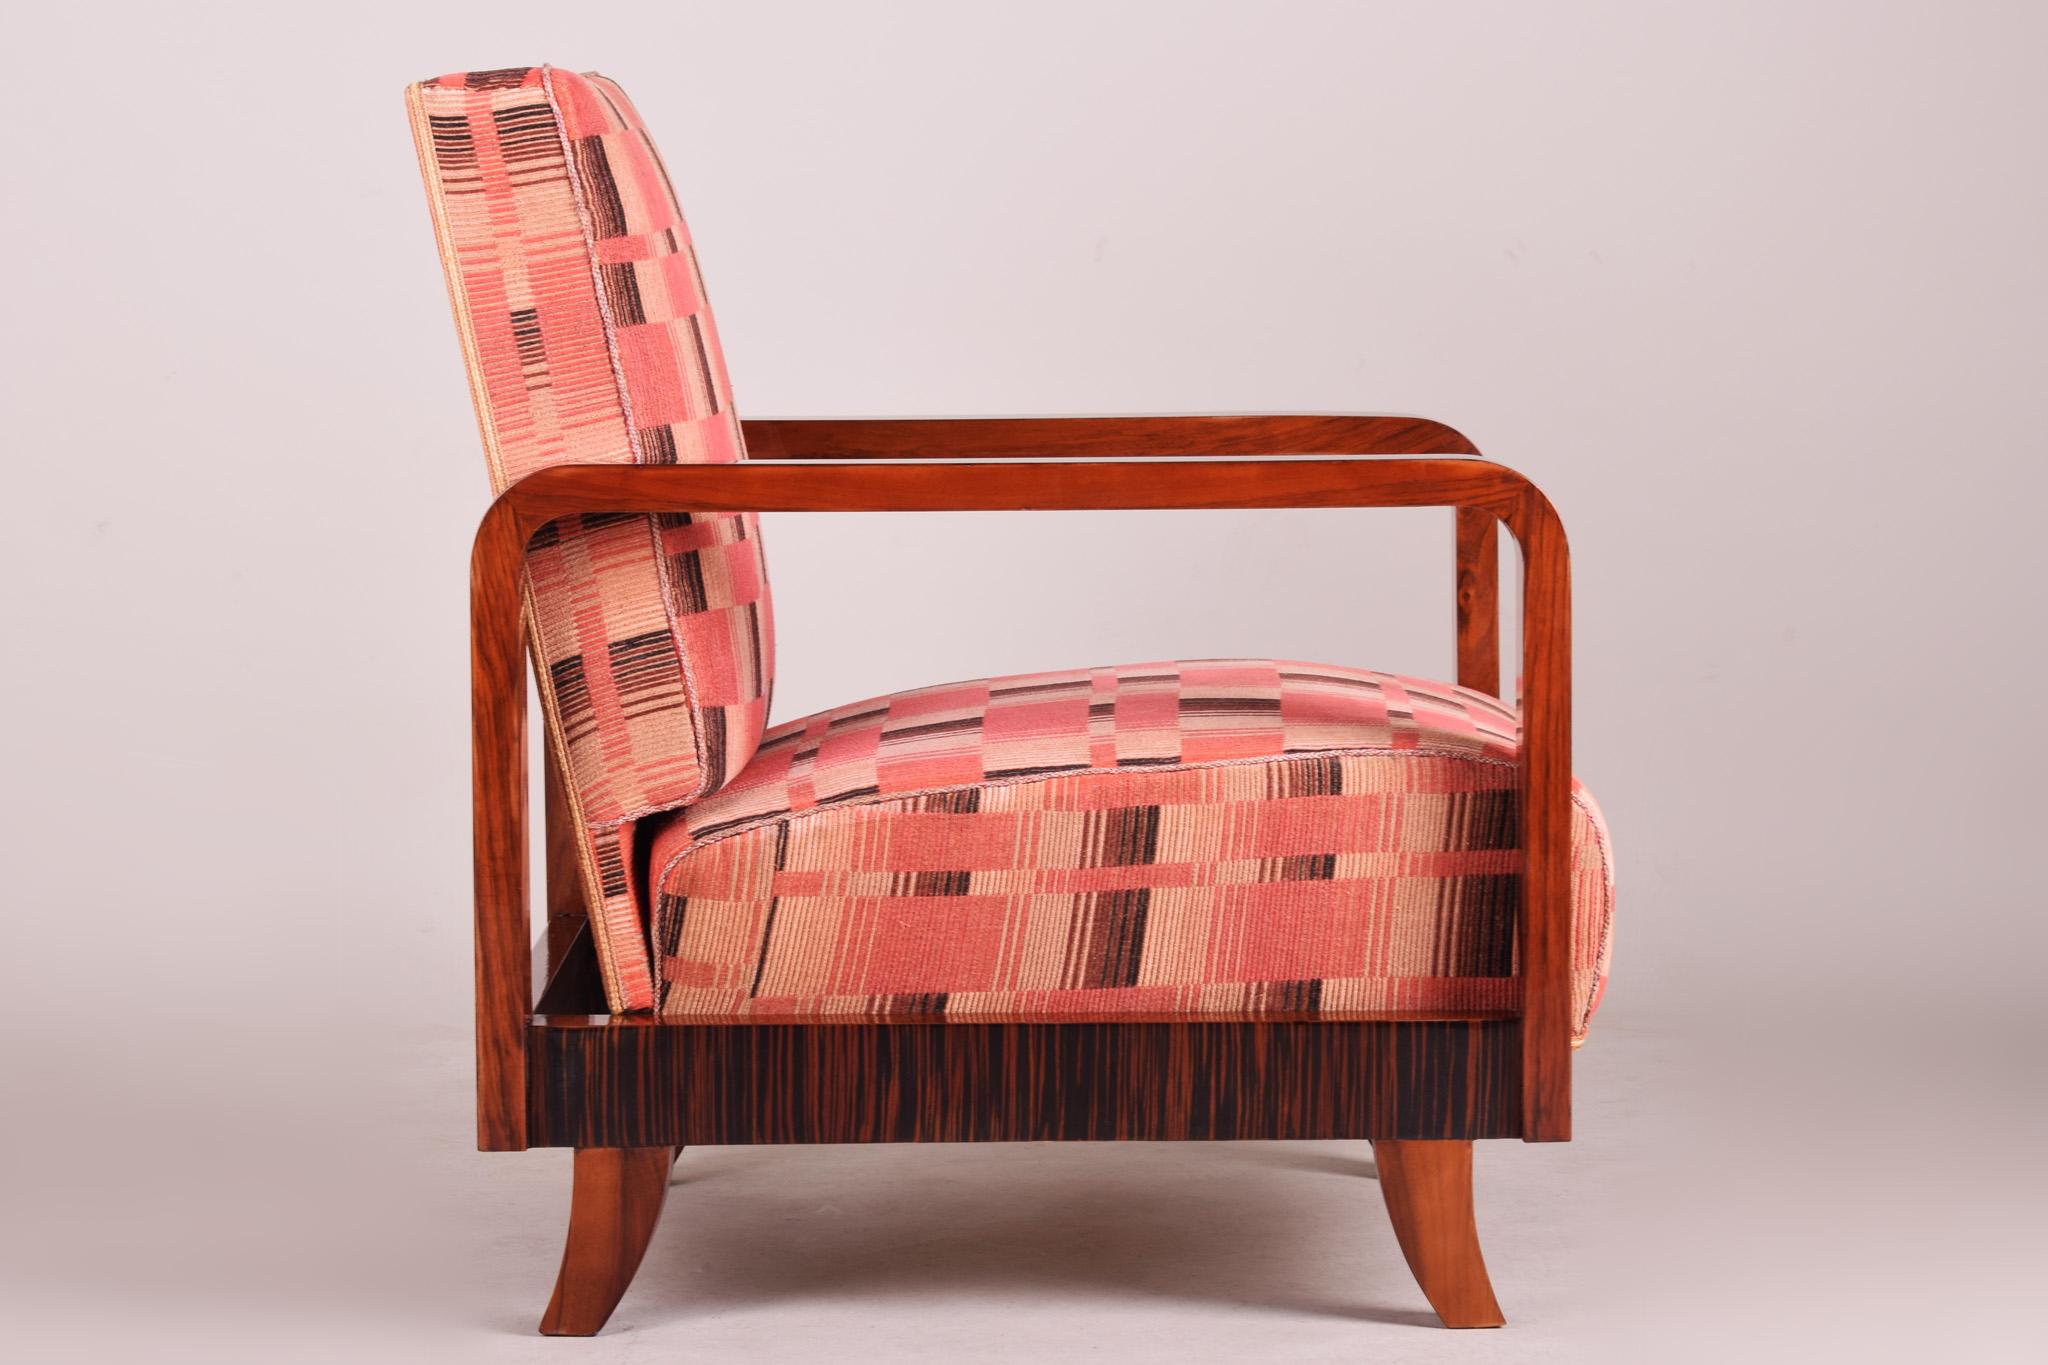 Pink Art Deco Armchair, Made in 1930s Czechia and Restored, Original Fabric For Sale 9